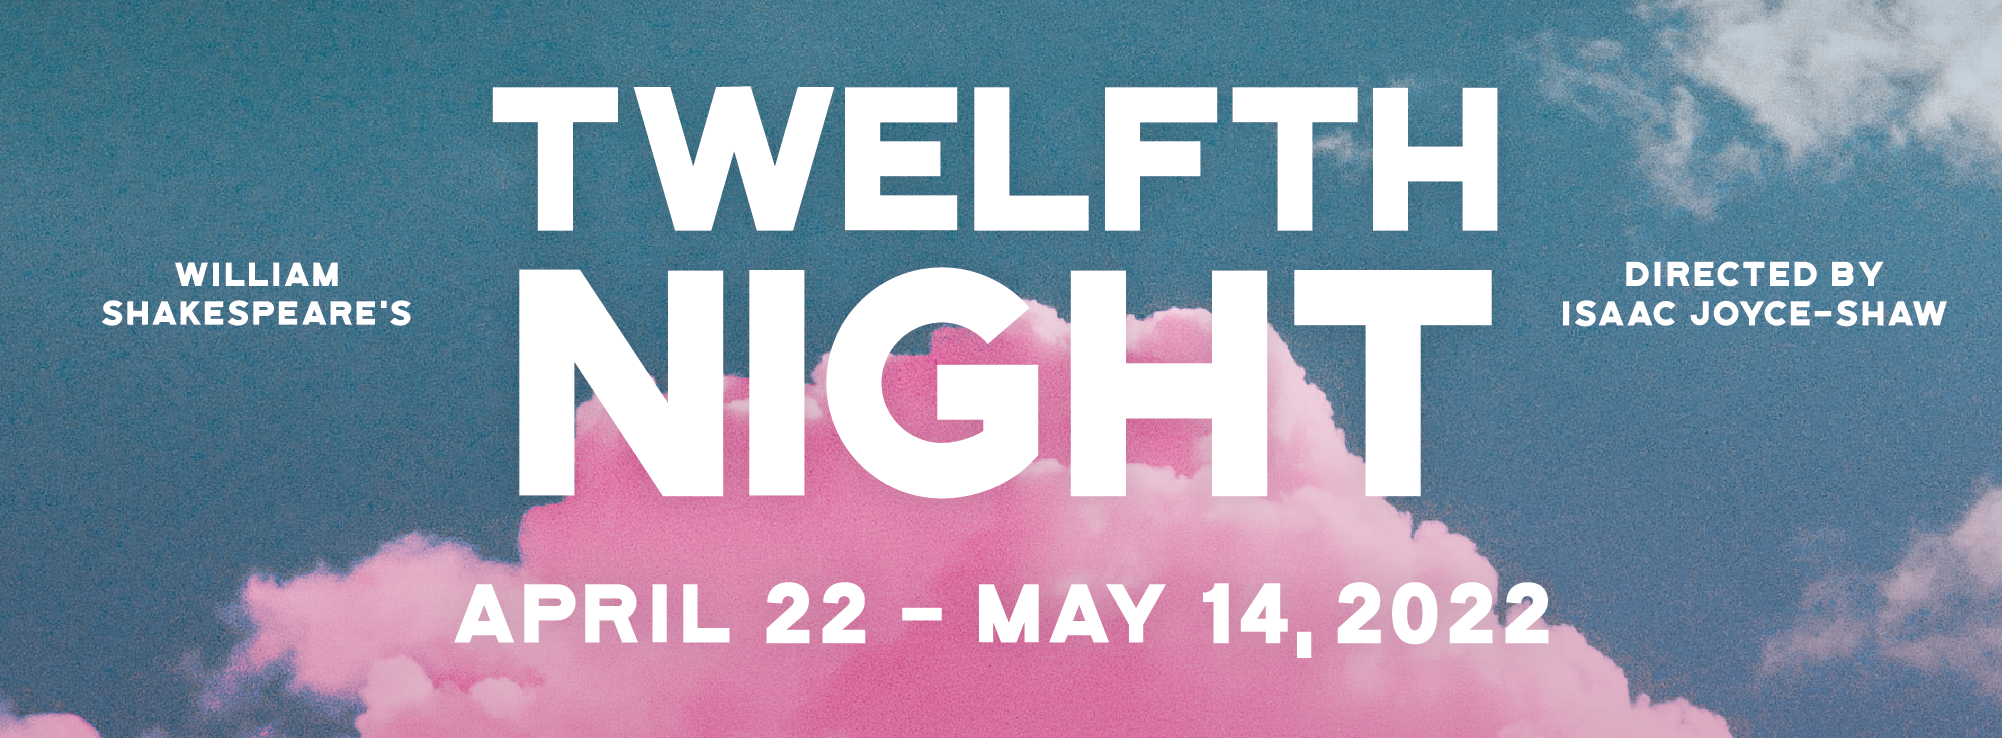 Open auditions for Shakespeare’s romantic comedy, Twelfth Night